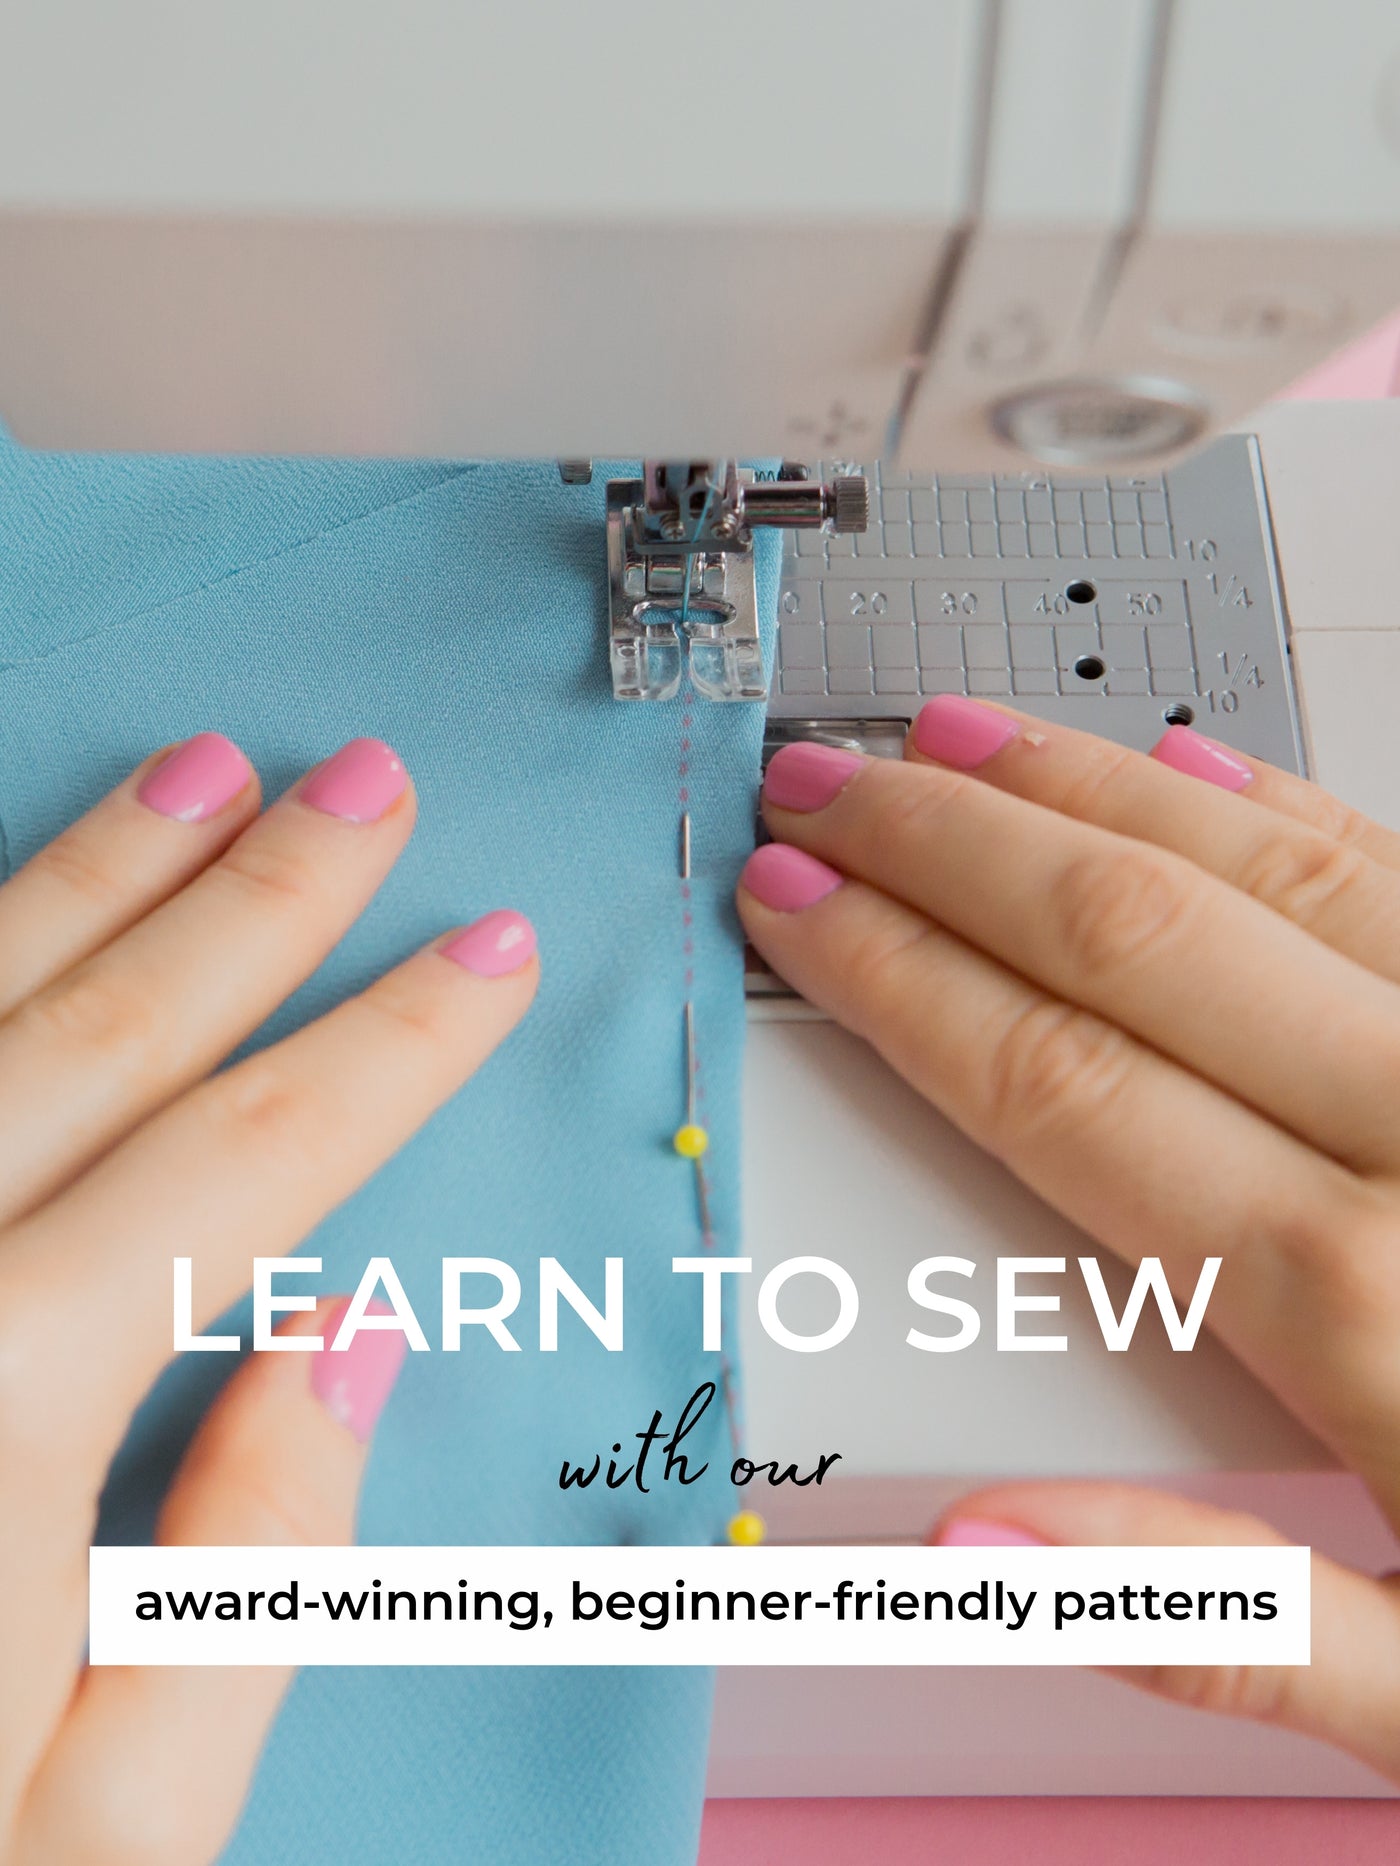 Learn to sew with our award-winning beginner-friendly sewing patterns